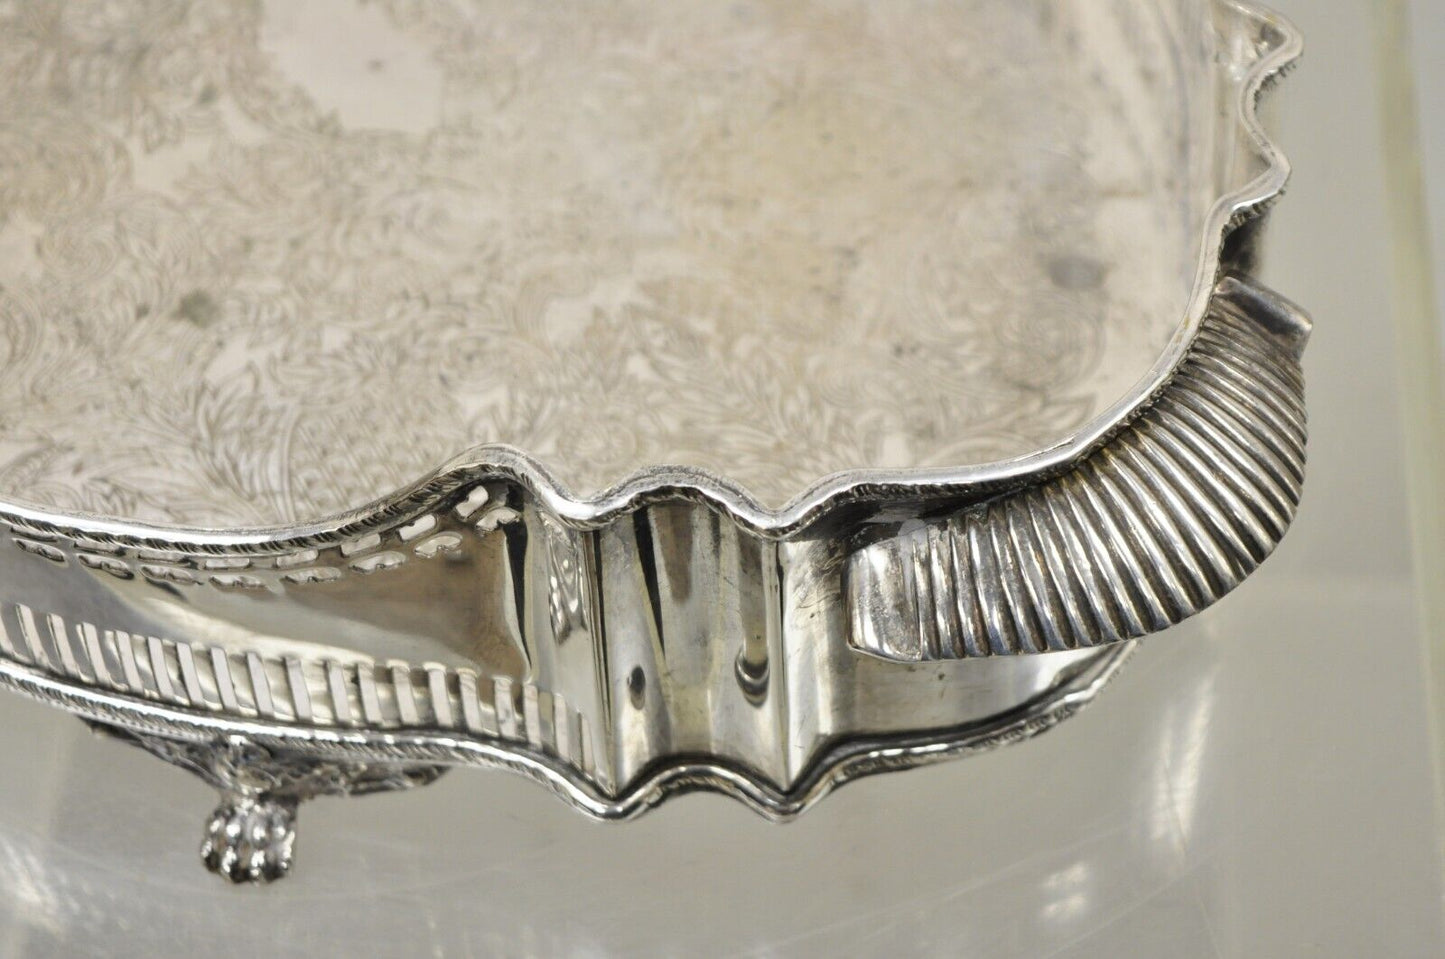 Vtg Silver Plated Shapely Serving Platter Tray with Pierced Gallery on Paw Feet